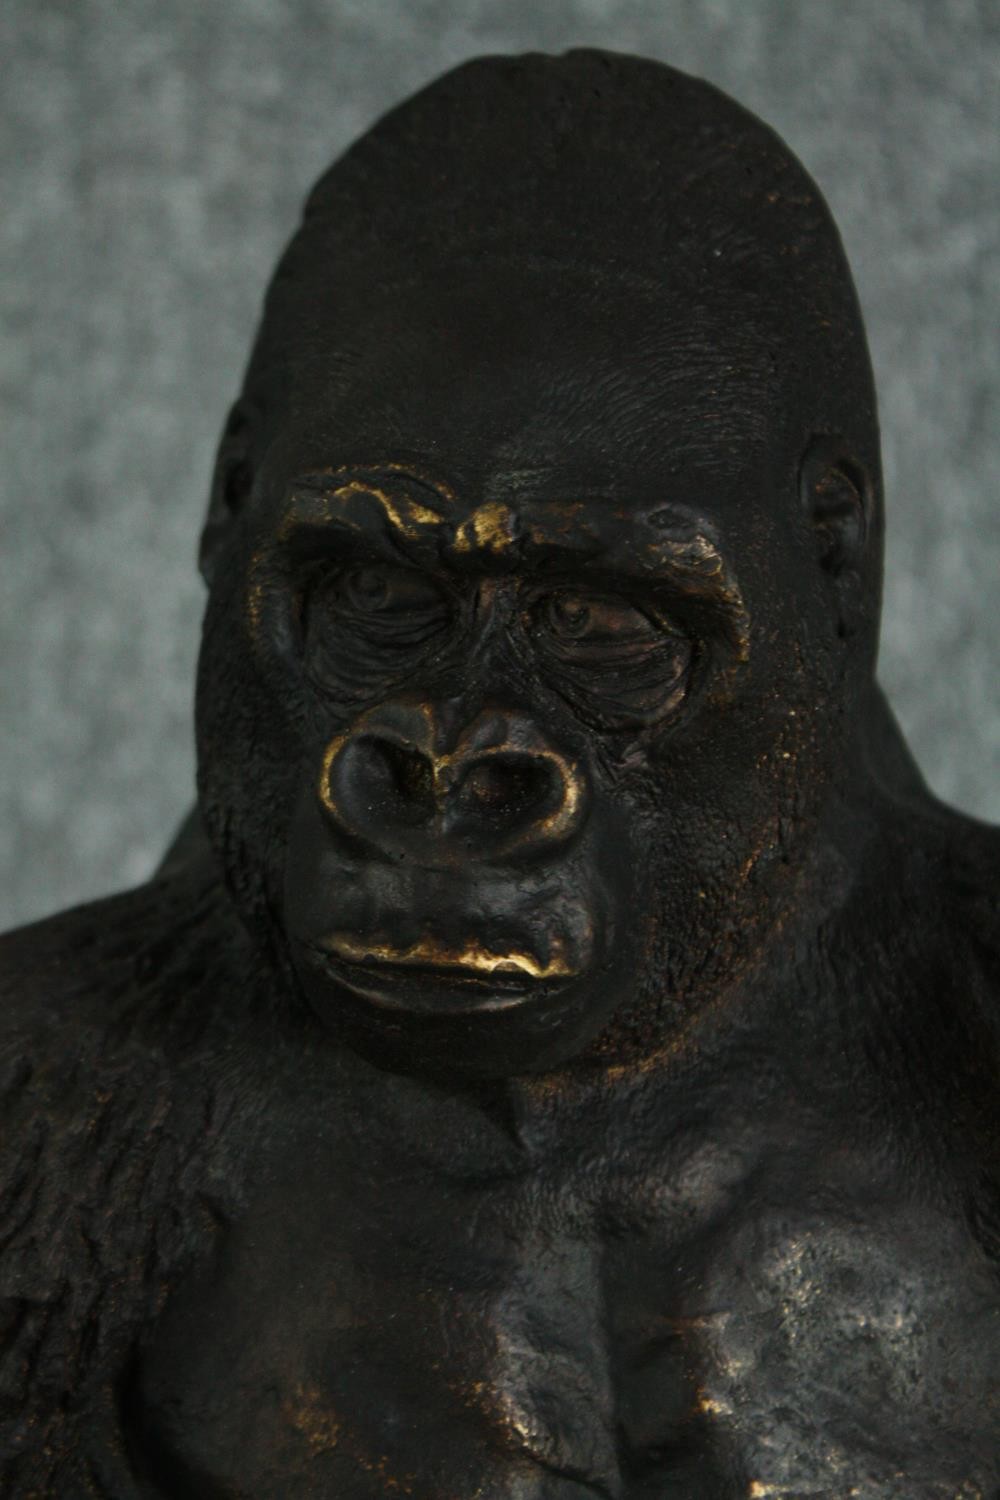 A large moulded figure. A gorilla finished in a distressed bronze type patina. H.40cm. - Image 2 of 4